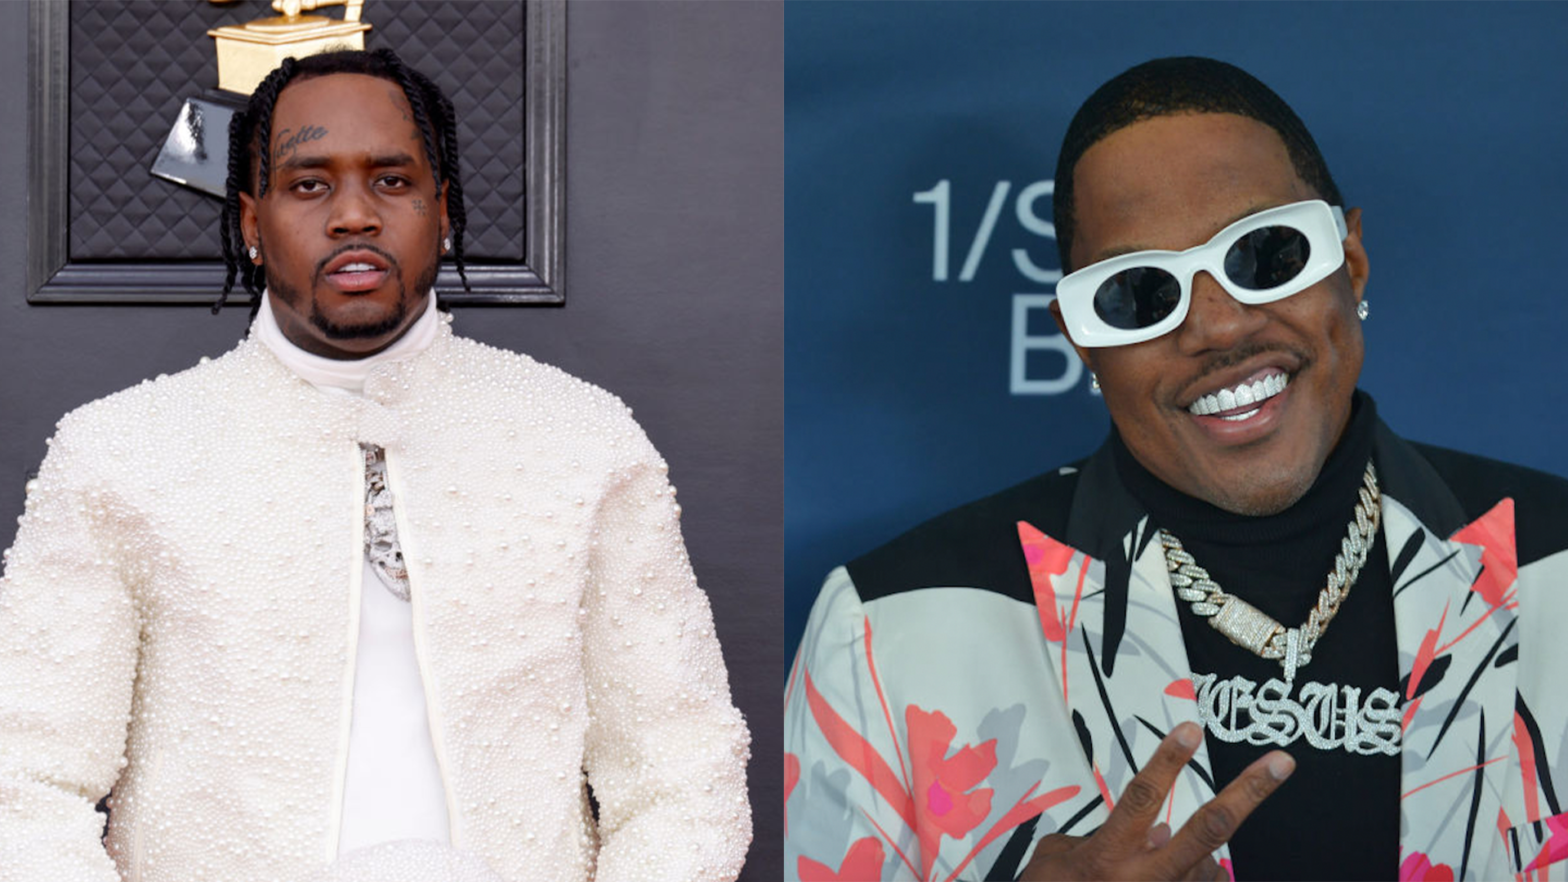 Mase Responds To Fivio Foreign's Claims Regarding His Record Deal: 'At One Time, I Gave Him $5,000, But I Gave Him $750,000'